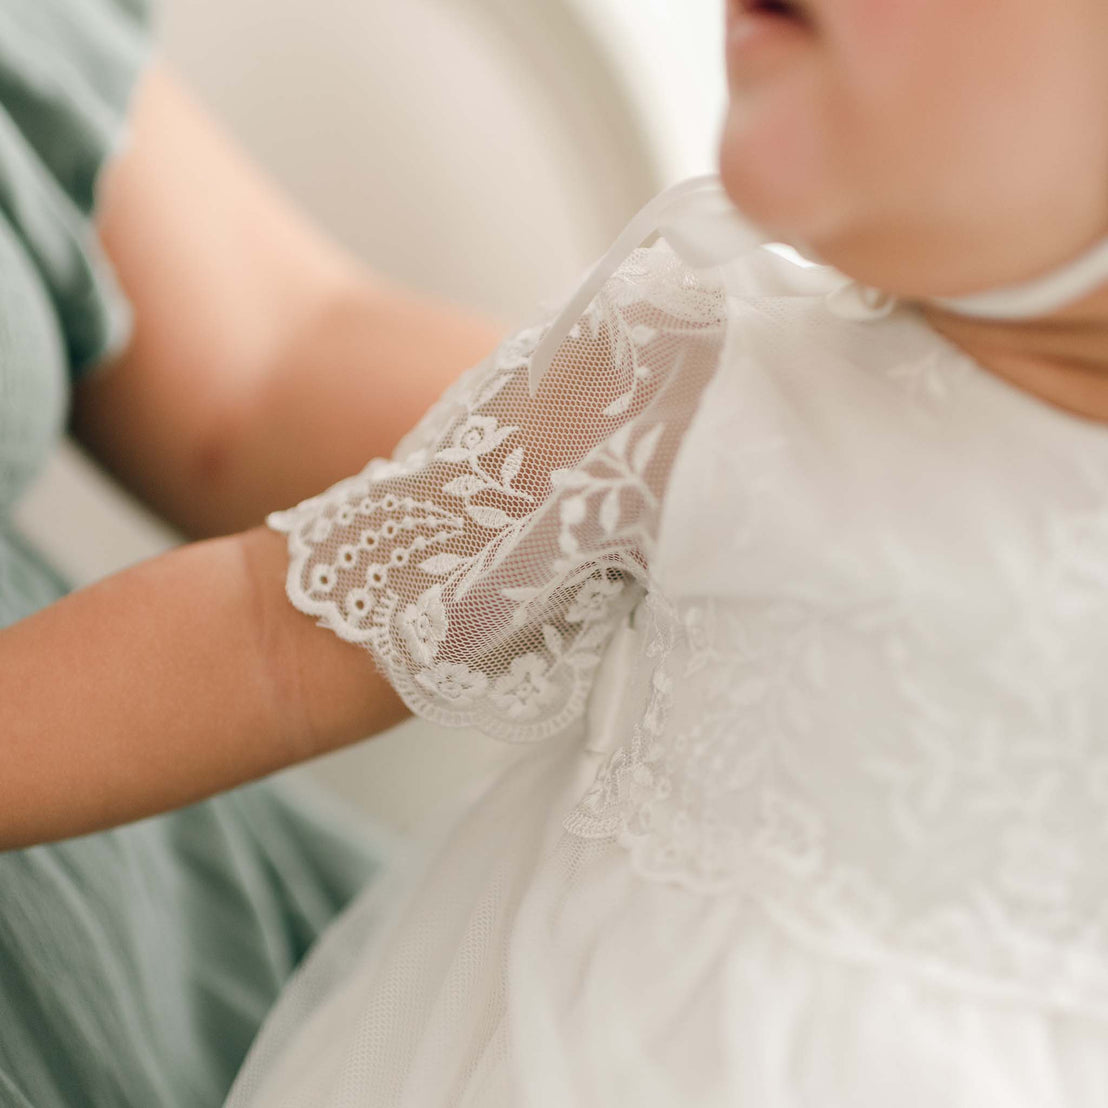 Close-up of a child wearing an Ella Christening Gown. The delicate embroidered netting lace on the sleeve is captured beautifully as the child is held by an adult dressed in green. The photo, with its softly blurred background, evokes a timeless, vintage heirloom style.